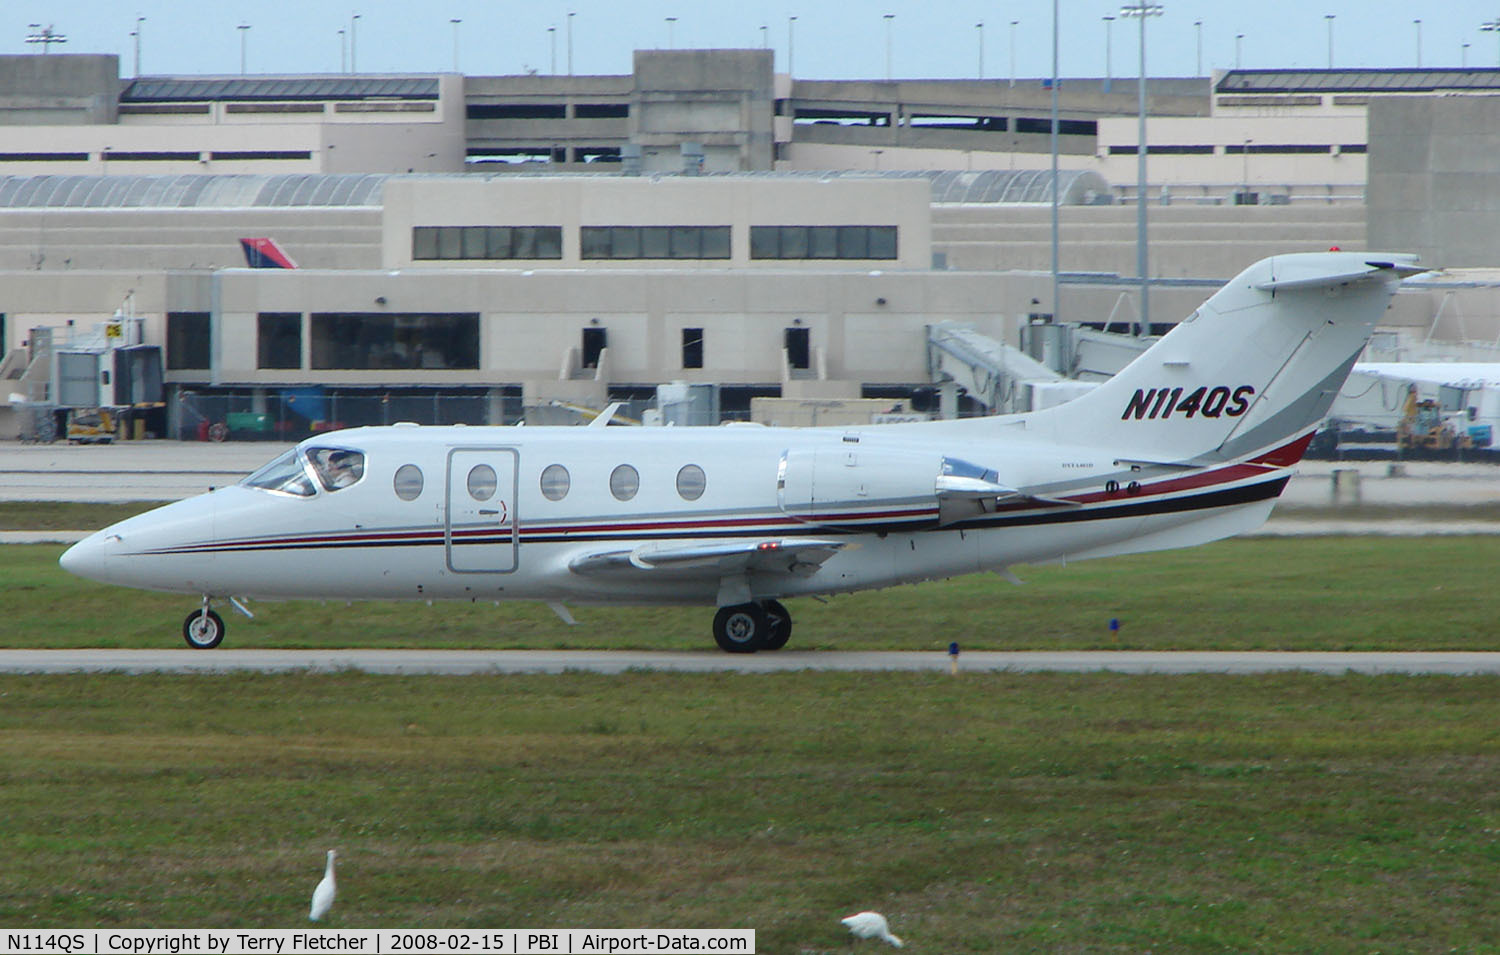 N114QS, 2007 Raytheon Beechjet 400A C/N RK-469, The business aircraft traffic at West Palm Beach on the Friday before President's Day always provides the aviation enthusiast / photographer with a treat